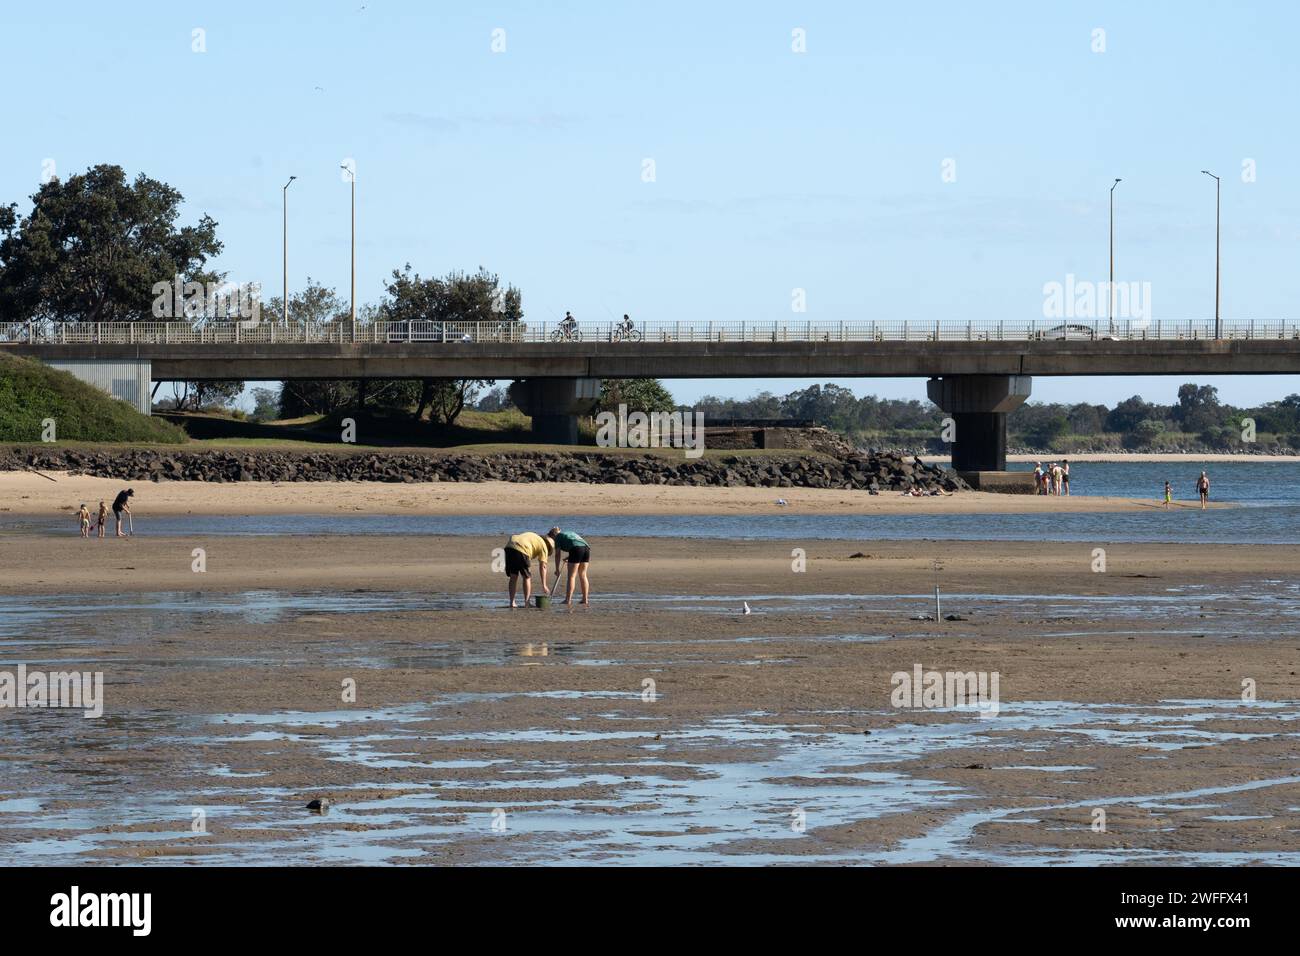 People pumping yabbies on riverbed at lowtide with Missingham Bridge in the background Stock Photo